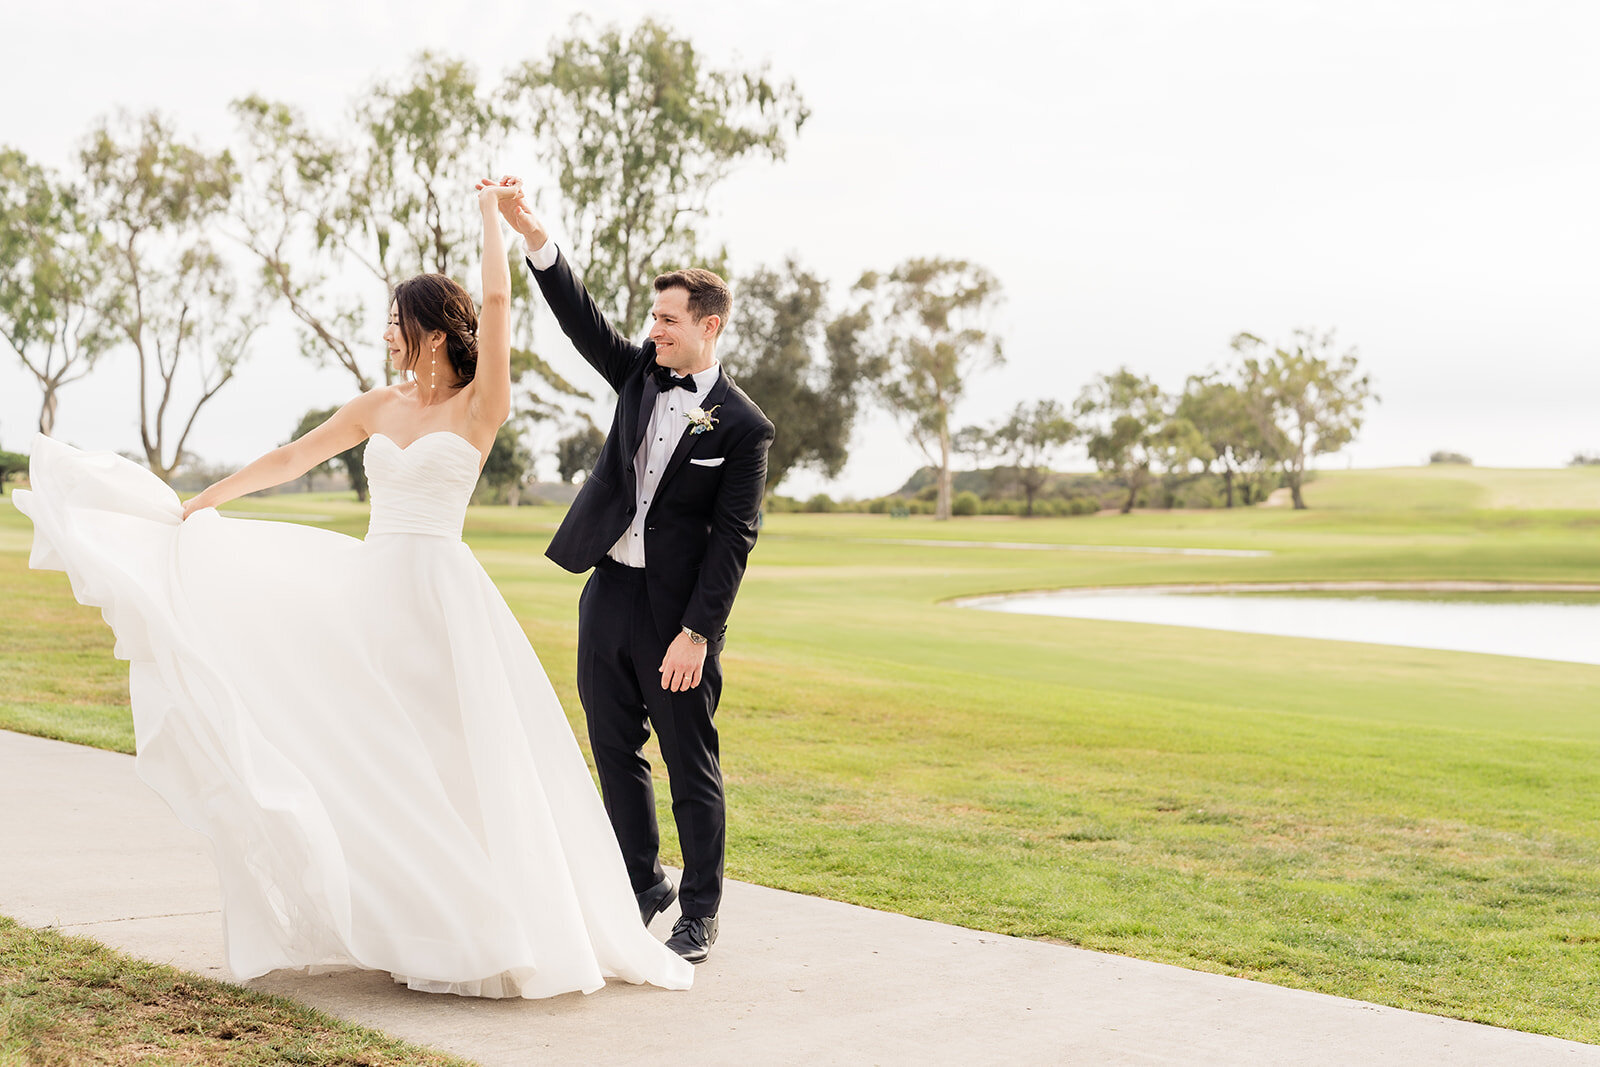 A groom twirling his bride on a side walk with a golf course in the background at The Lodge at Torrey Pines